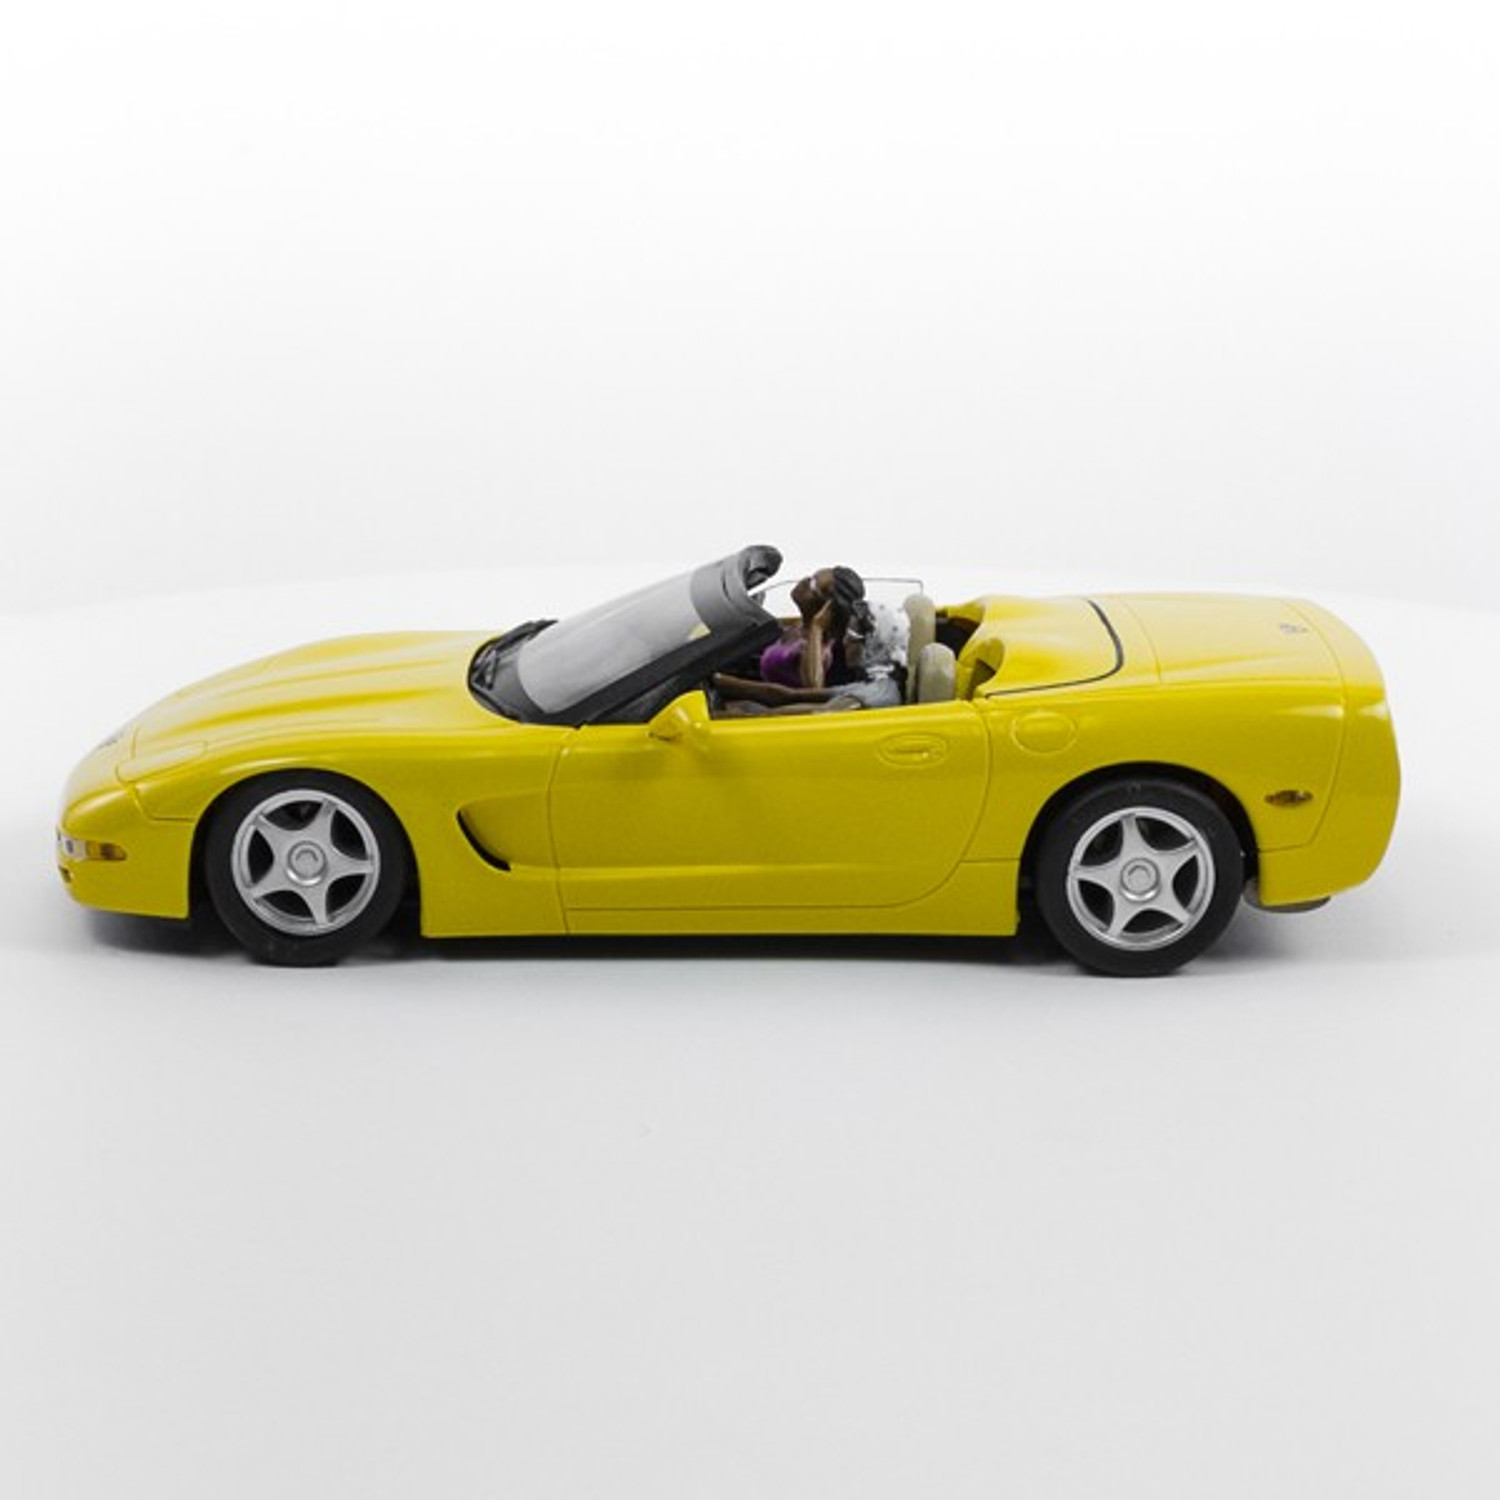 Stock Number: 16250 - Yellow Open Top Car by Unknown